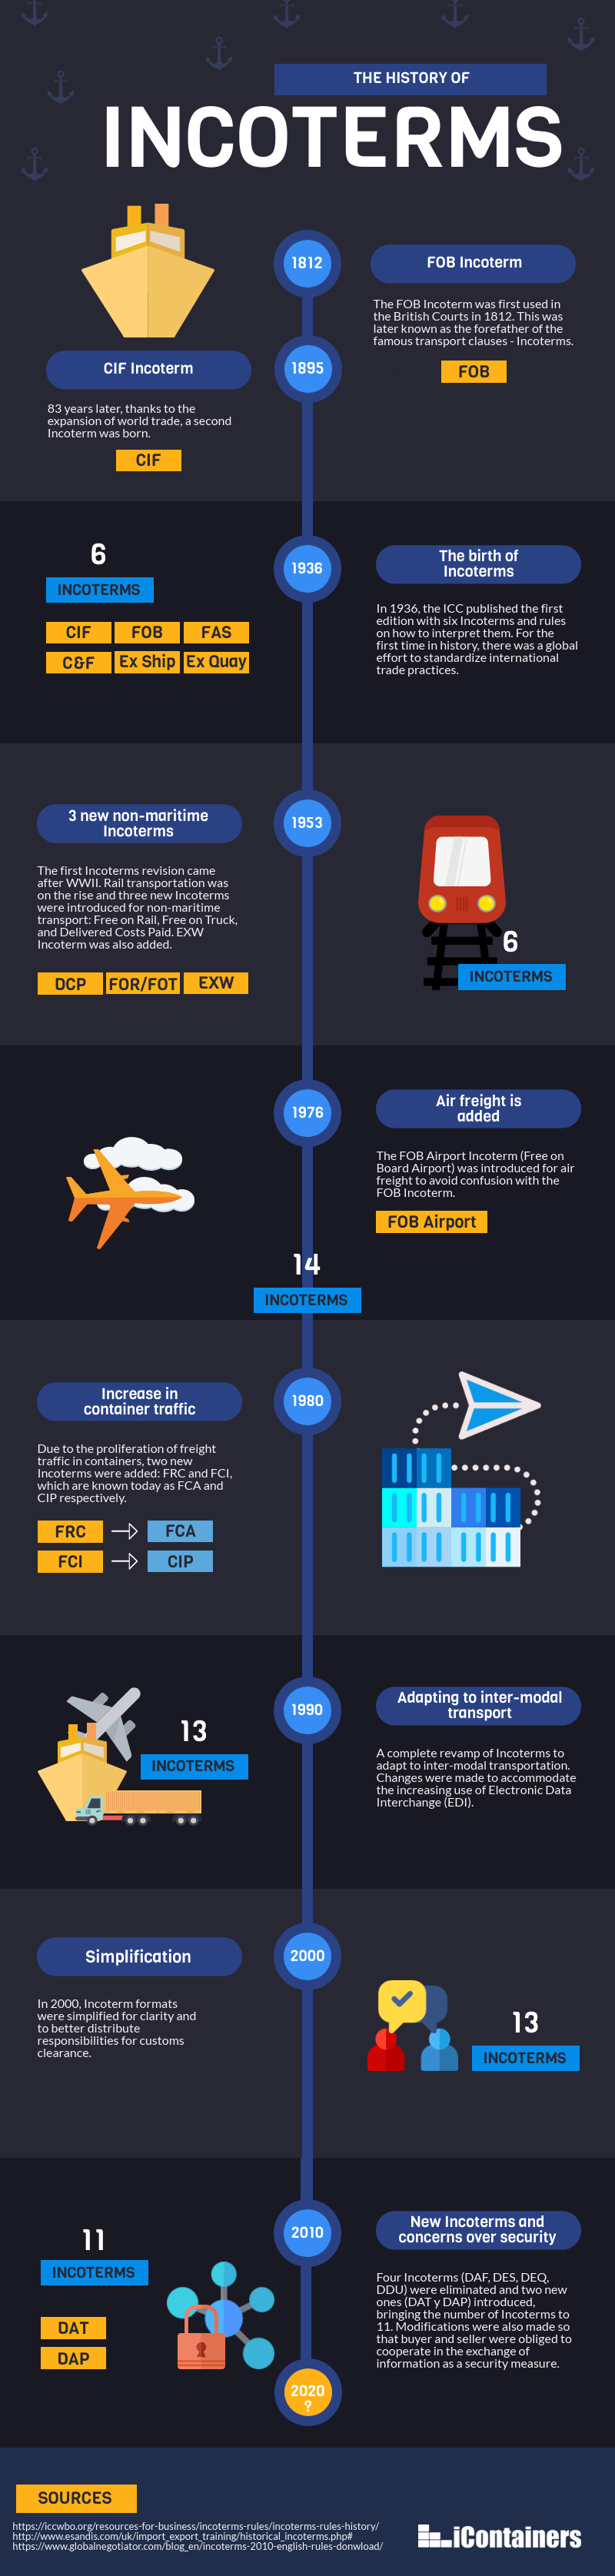 History of Incoterms infographic